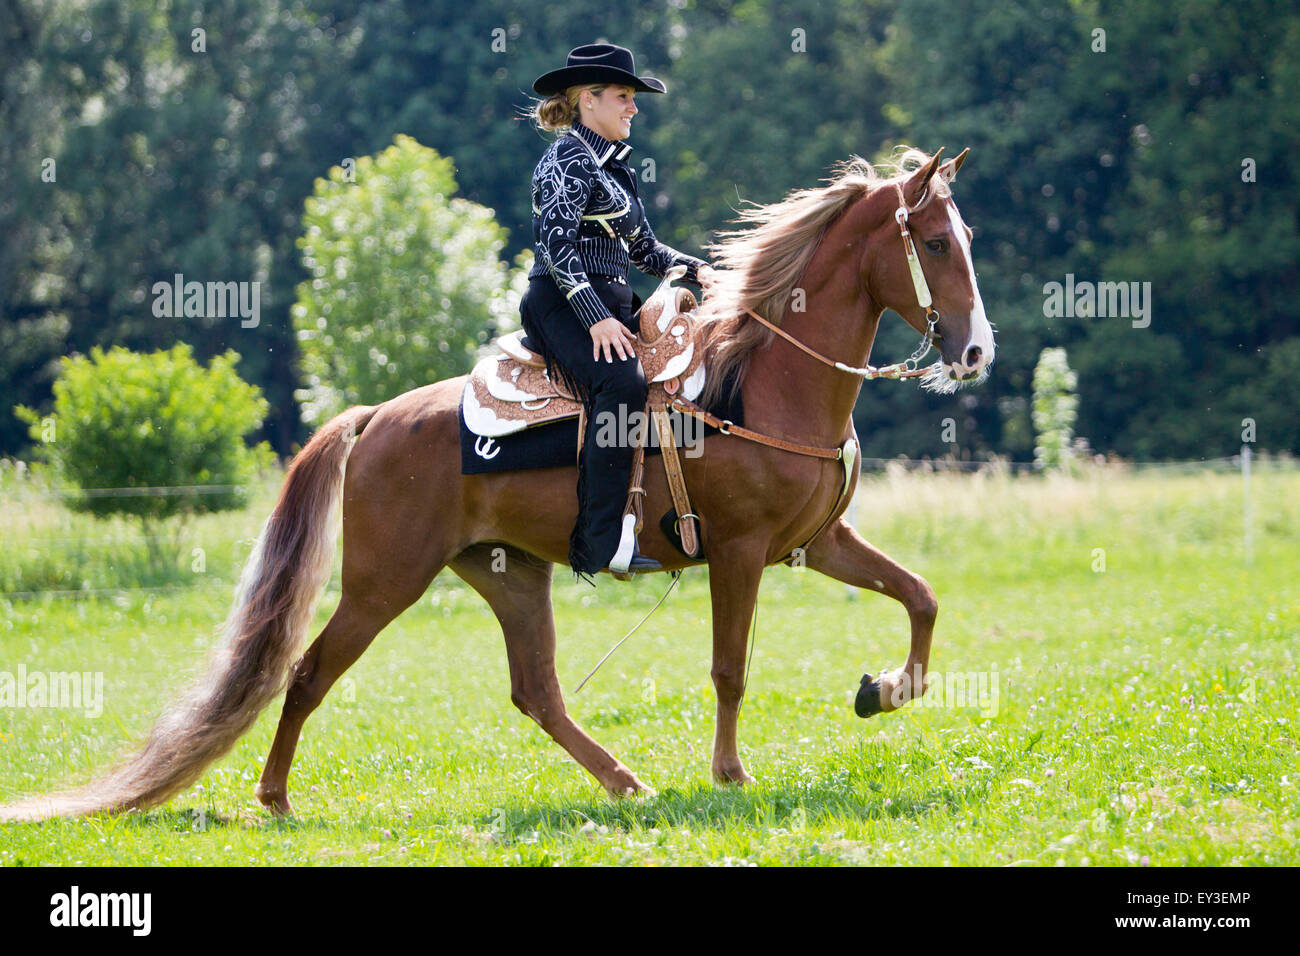 Tennessee Walking Horse. Rider Denise Bader Keyser performing the Walk on a chestnut mare. Germany Stock Photo